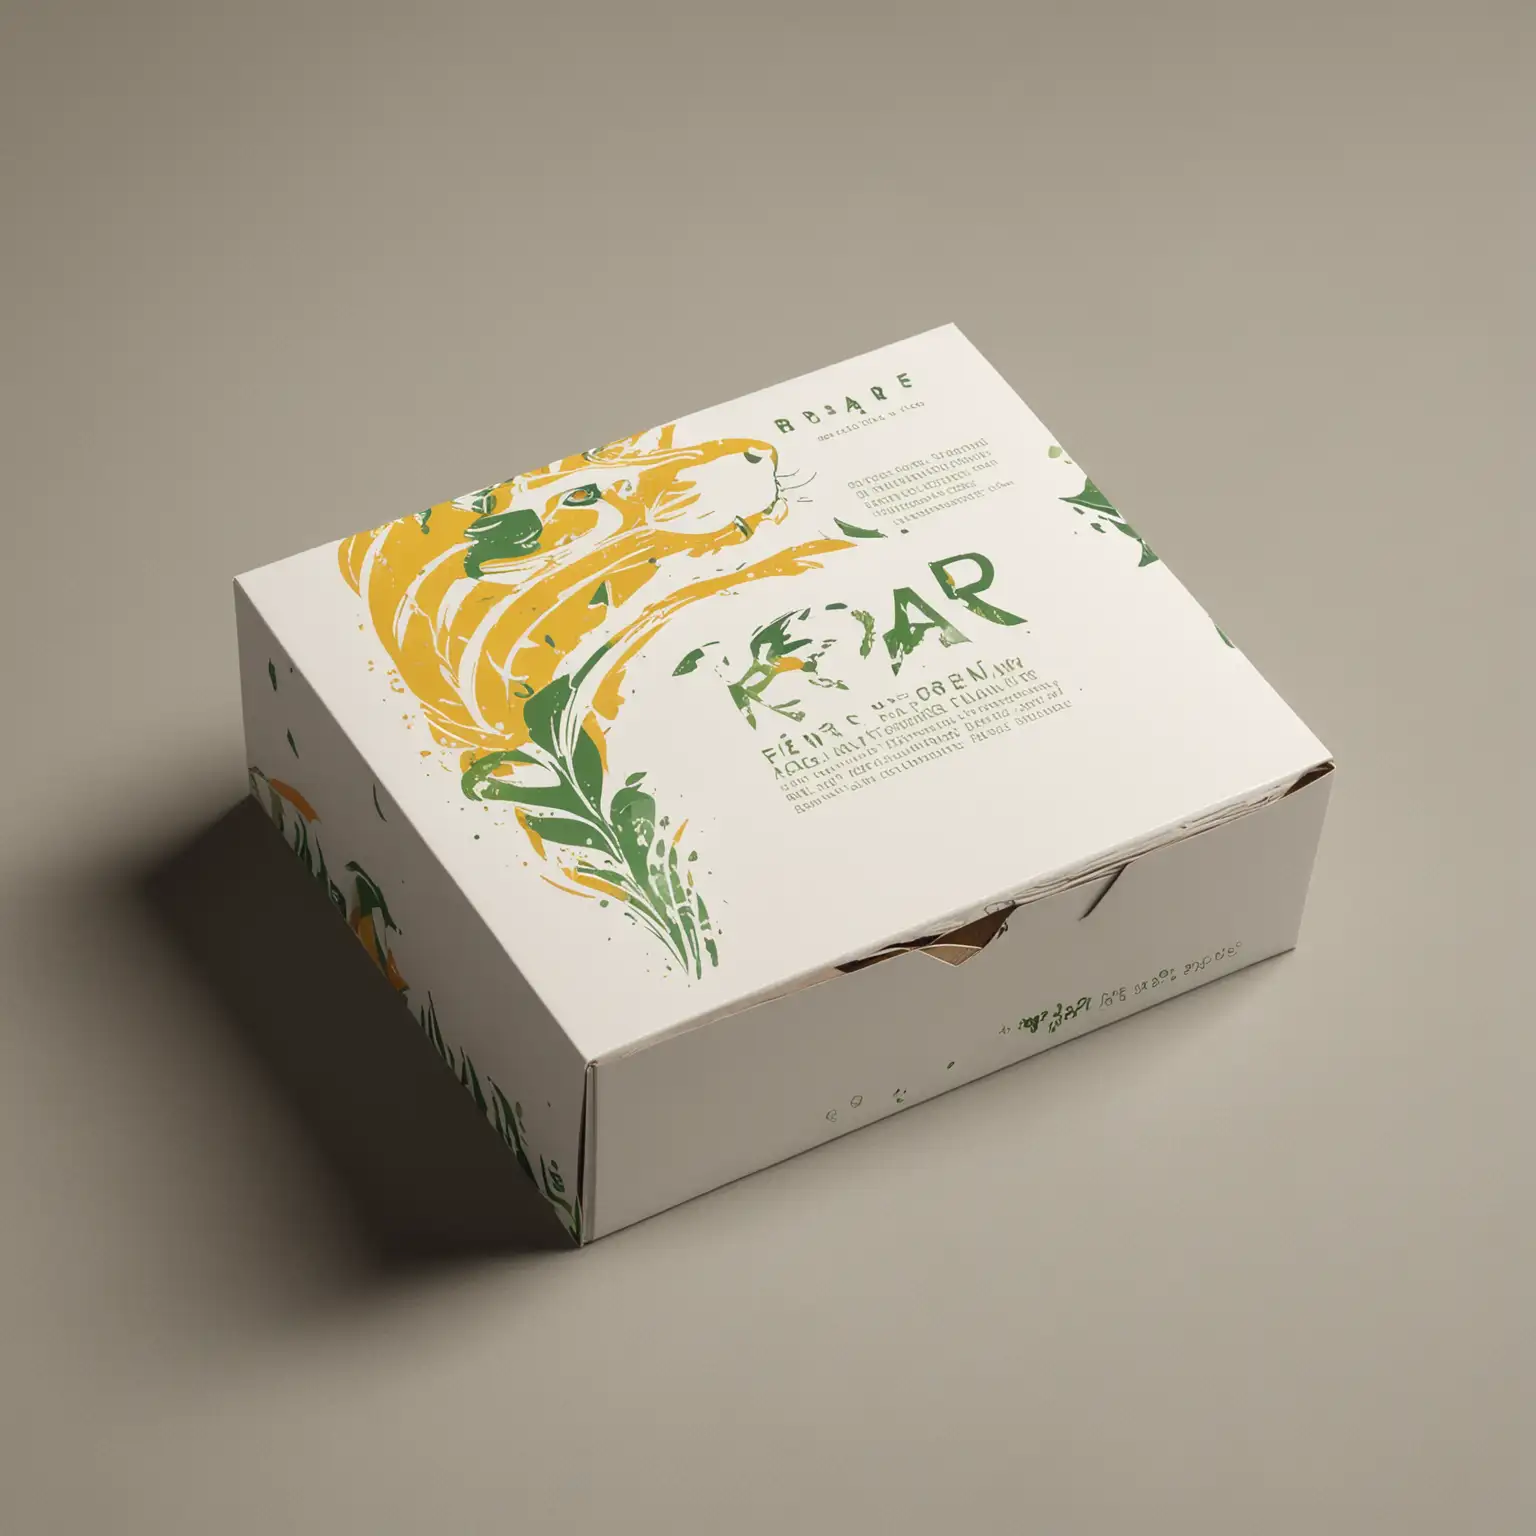 A sleek, sturdy, and eco-friendly delivery box. Box color: Matte white with accents of vibrant green and yellow. Logo placement: Roar Nutrition Centered on the top of the box with the tagline “Fuel Your Potential, Unleash Your Power” beneath it. Design elements: Subtle geometric patterns or waves to evoke a sense of energy and movement. Inside: Custom compartments to securely hold various supplement pouches and a small welcome note. Highlight eco-friendly and recyclable materials. the  box will have inside sport nutrition and supplements.